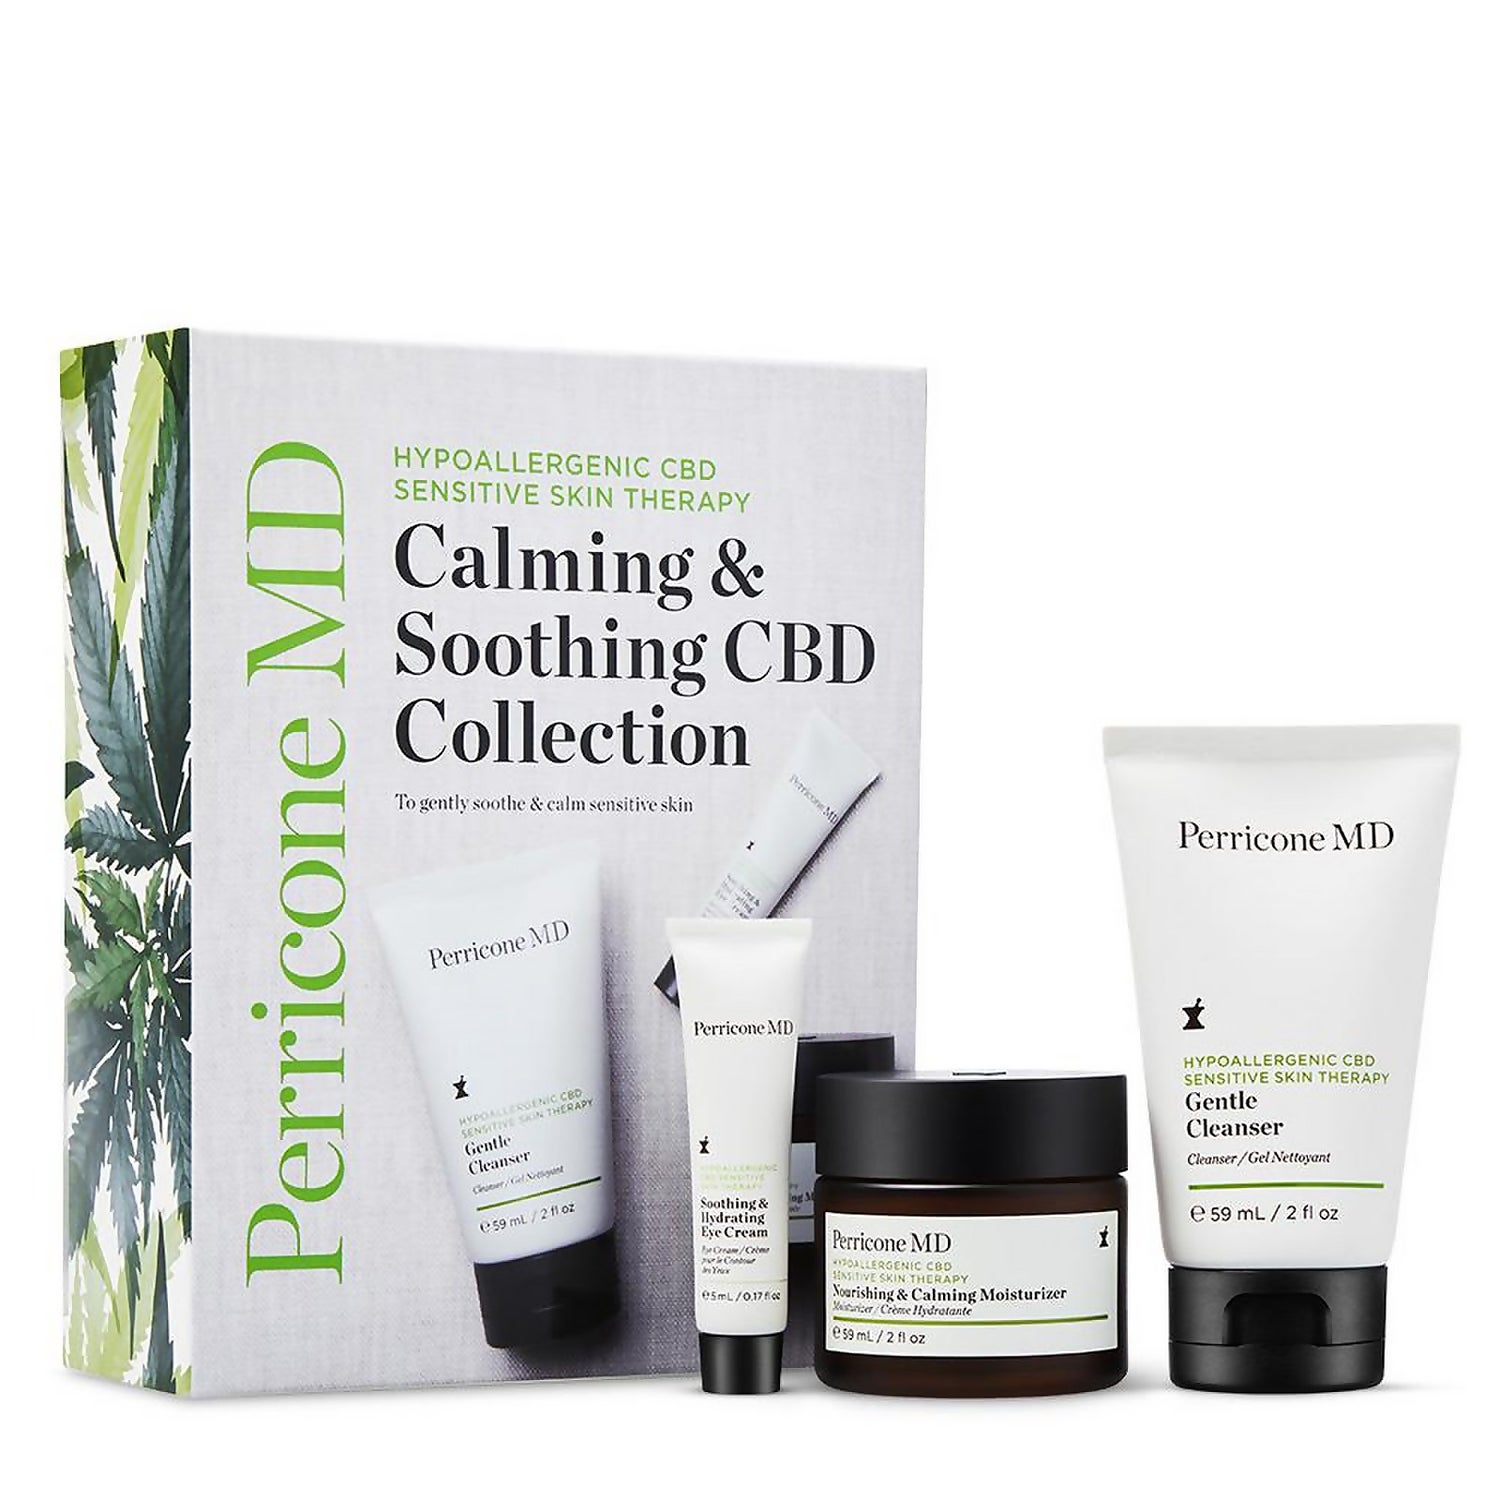 Perricone MD Calming & Soothing CBD Collection